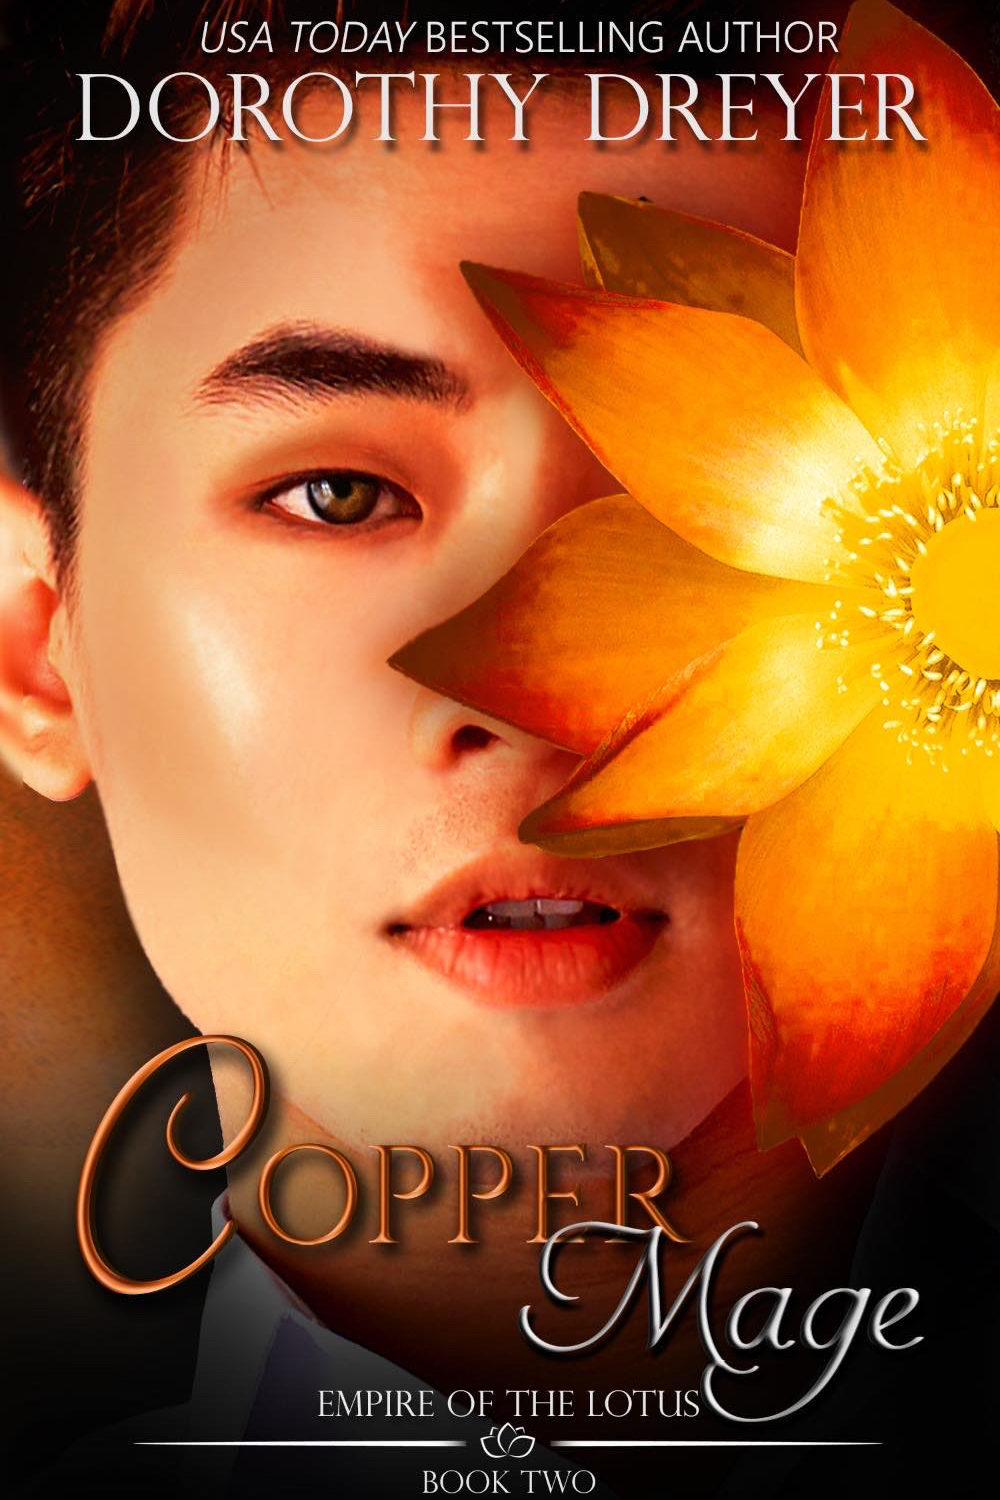 Copper Mage by Dorothy Dreyer